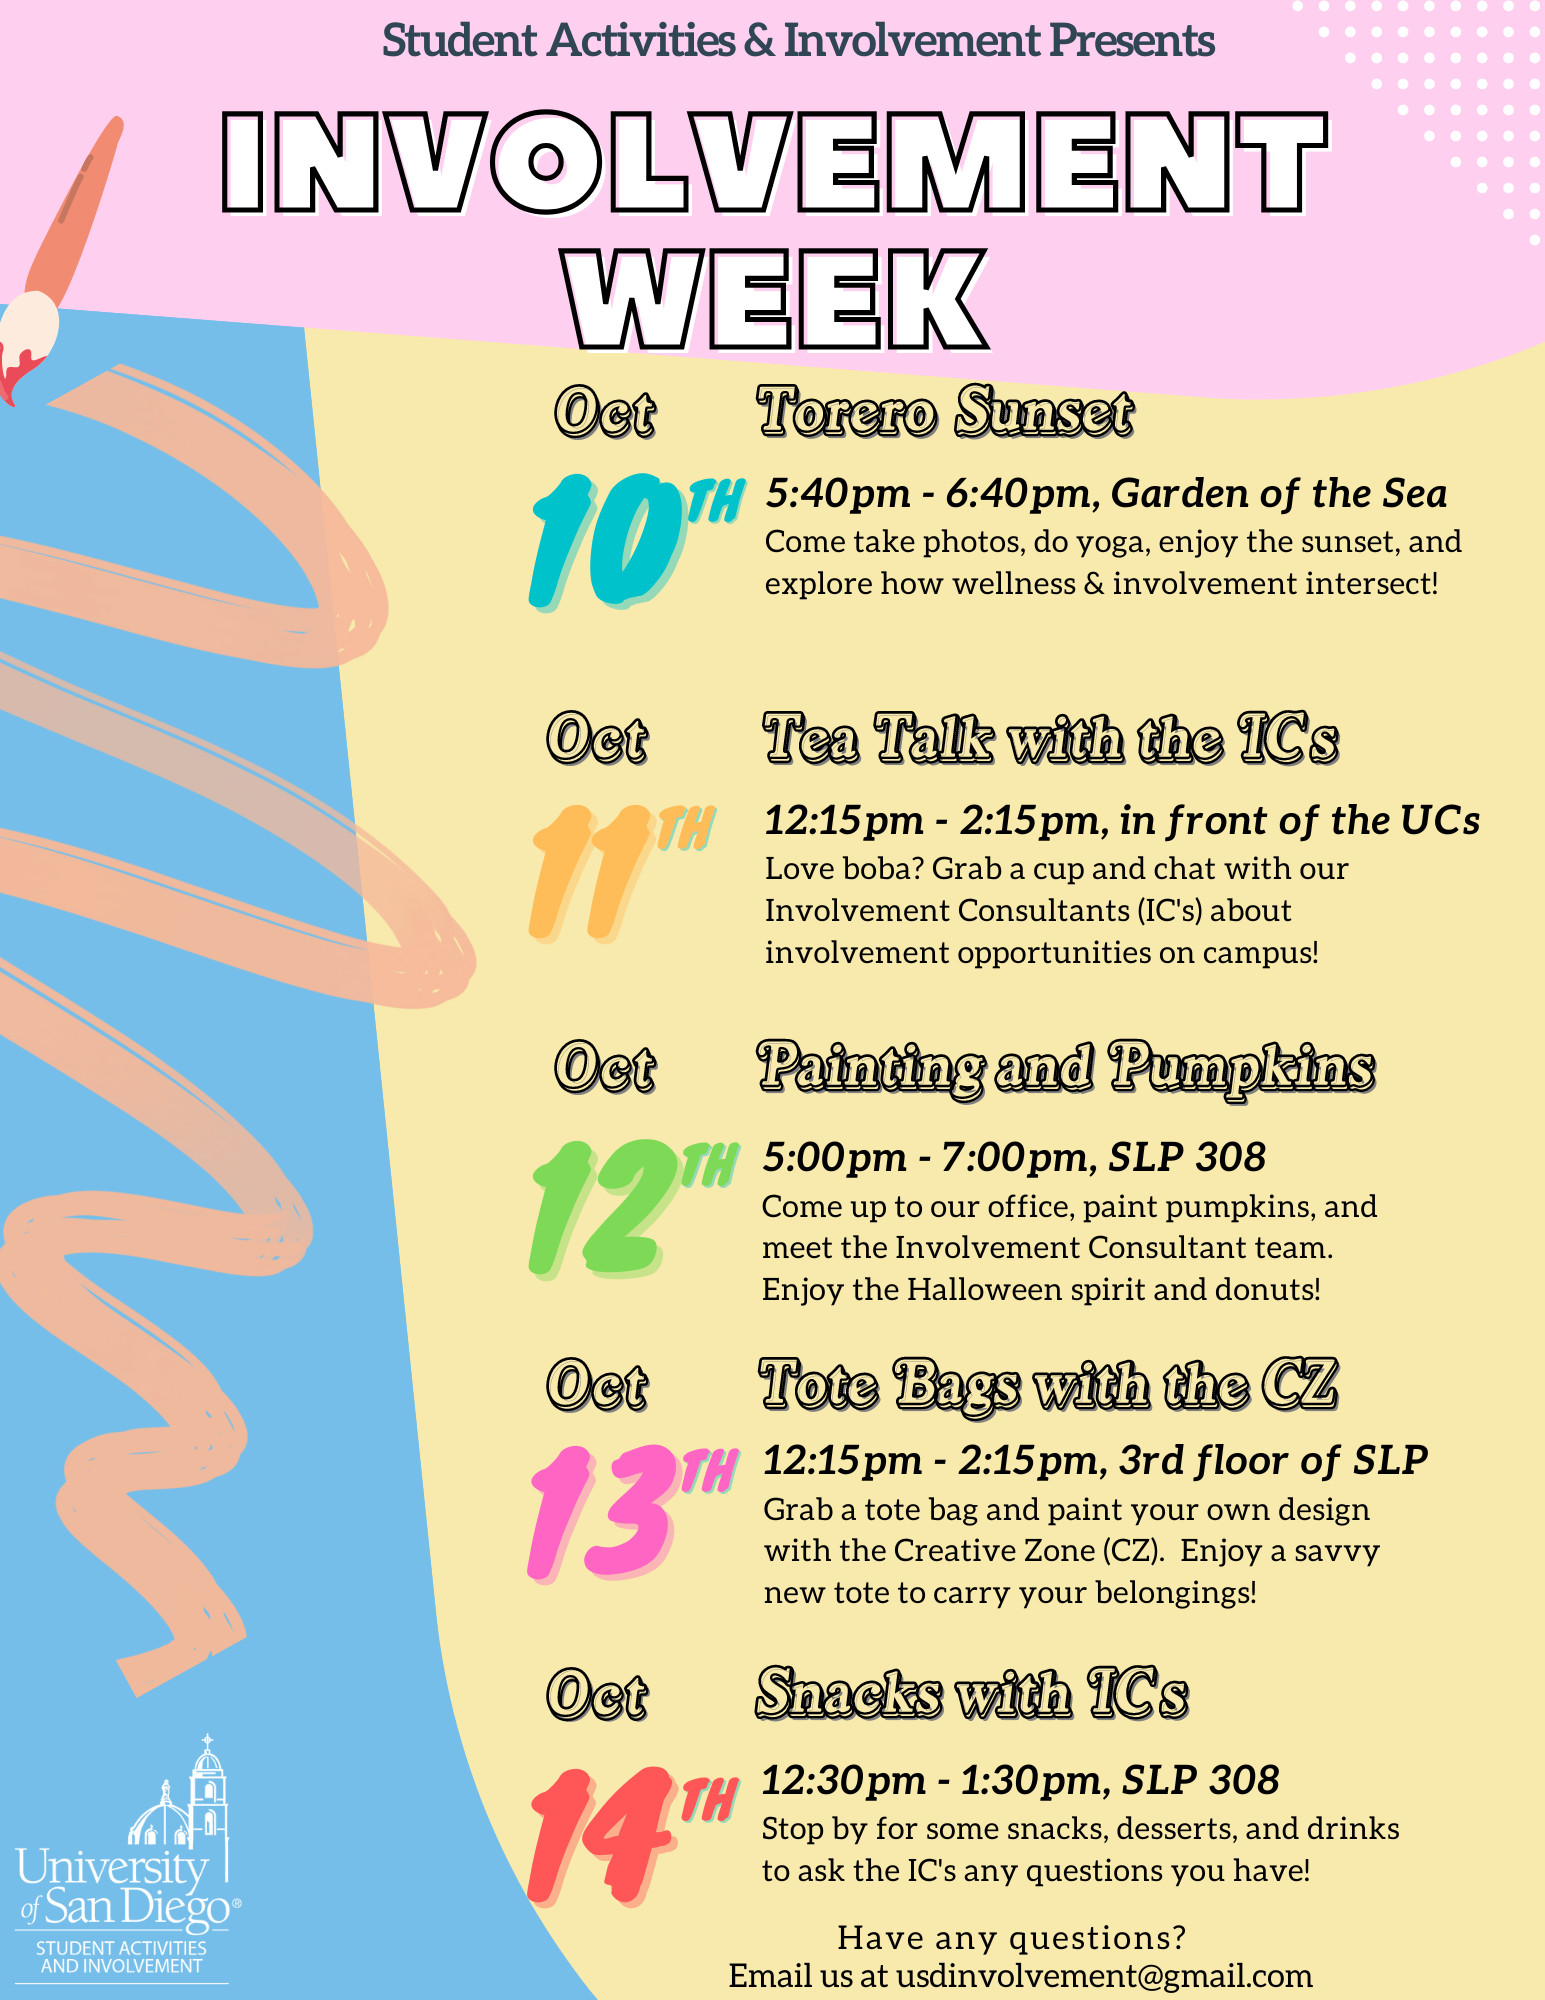 Join one or all Involvement Week's Events!